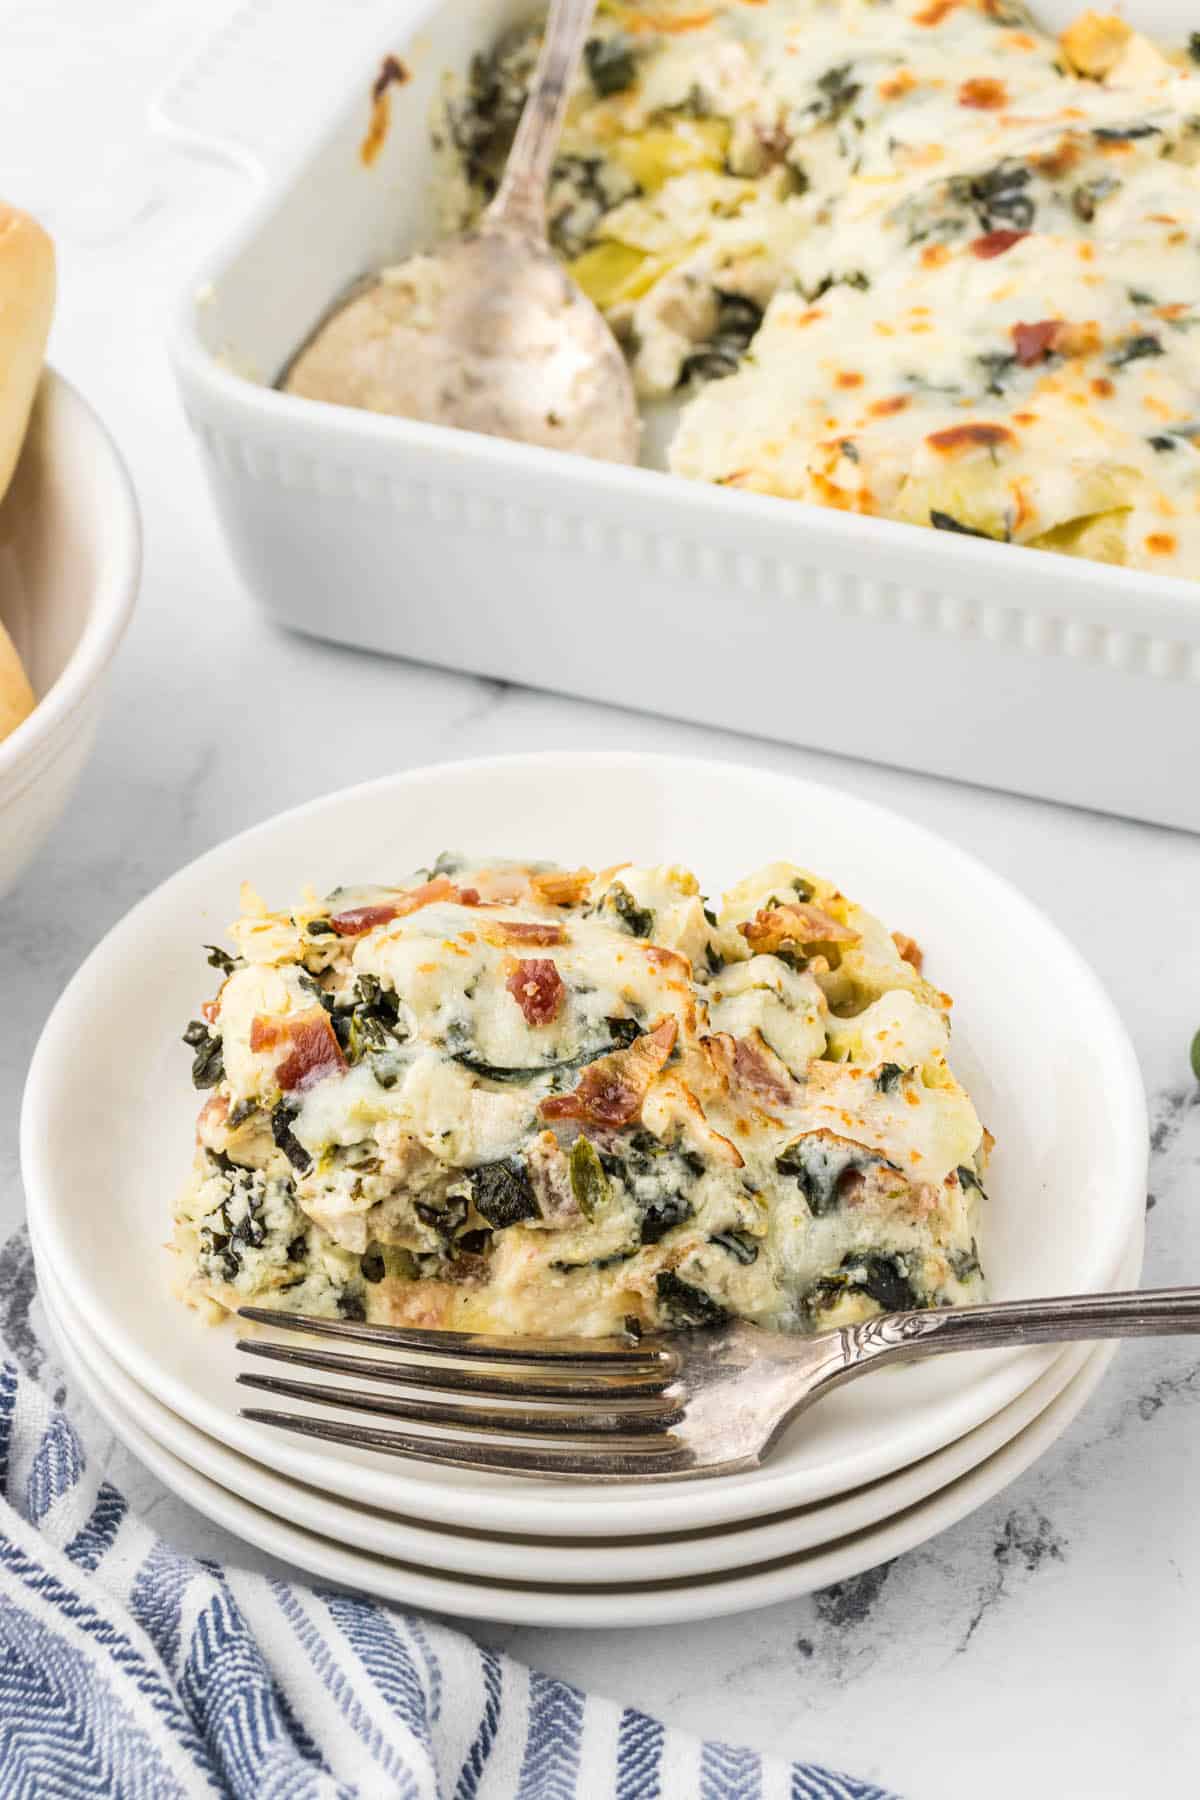 Plate with a serving of Chicken Spinach Artichoke Casserole dished up. With a fork on the side.